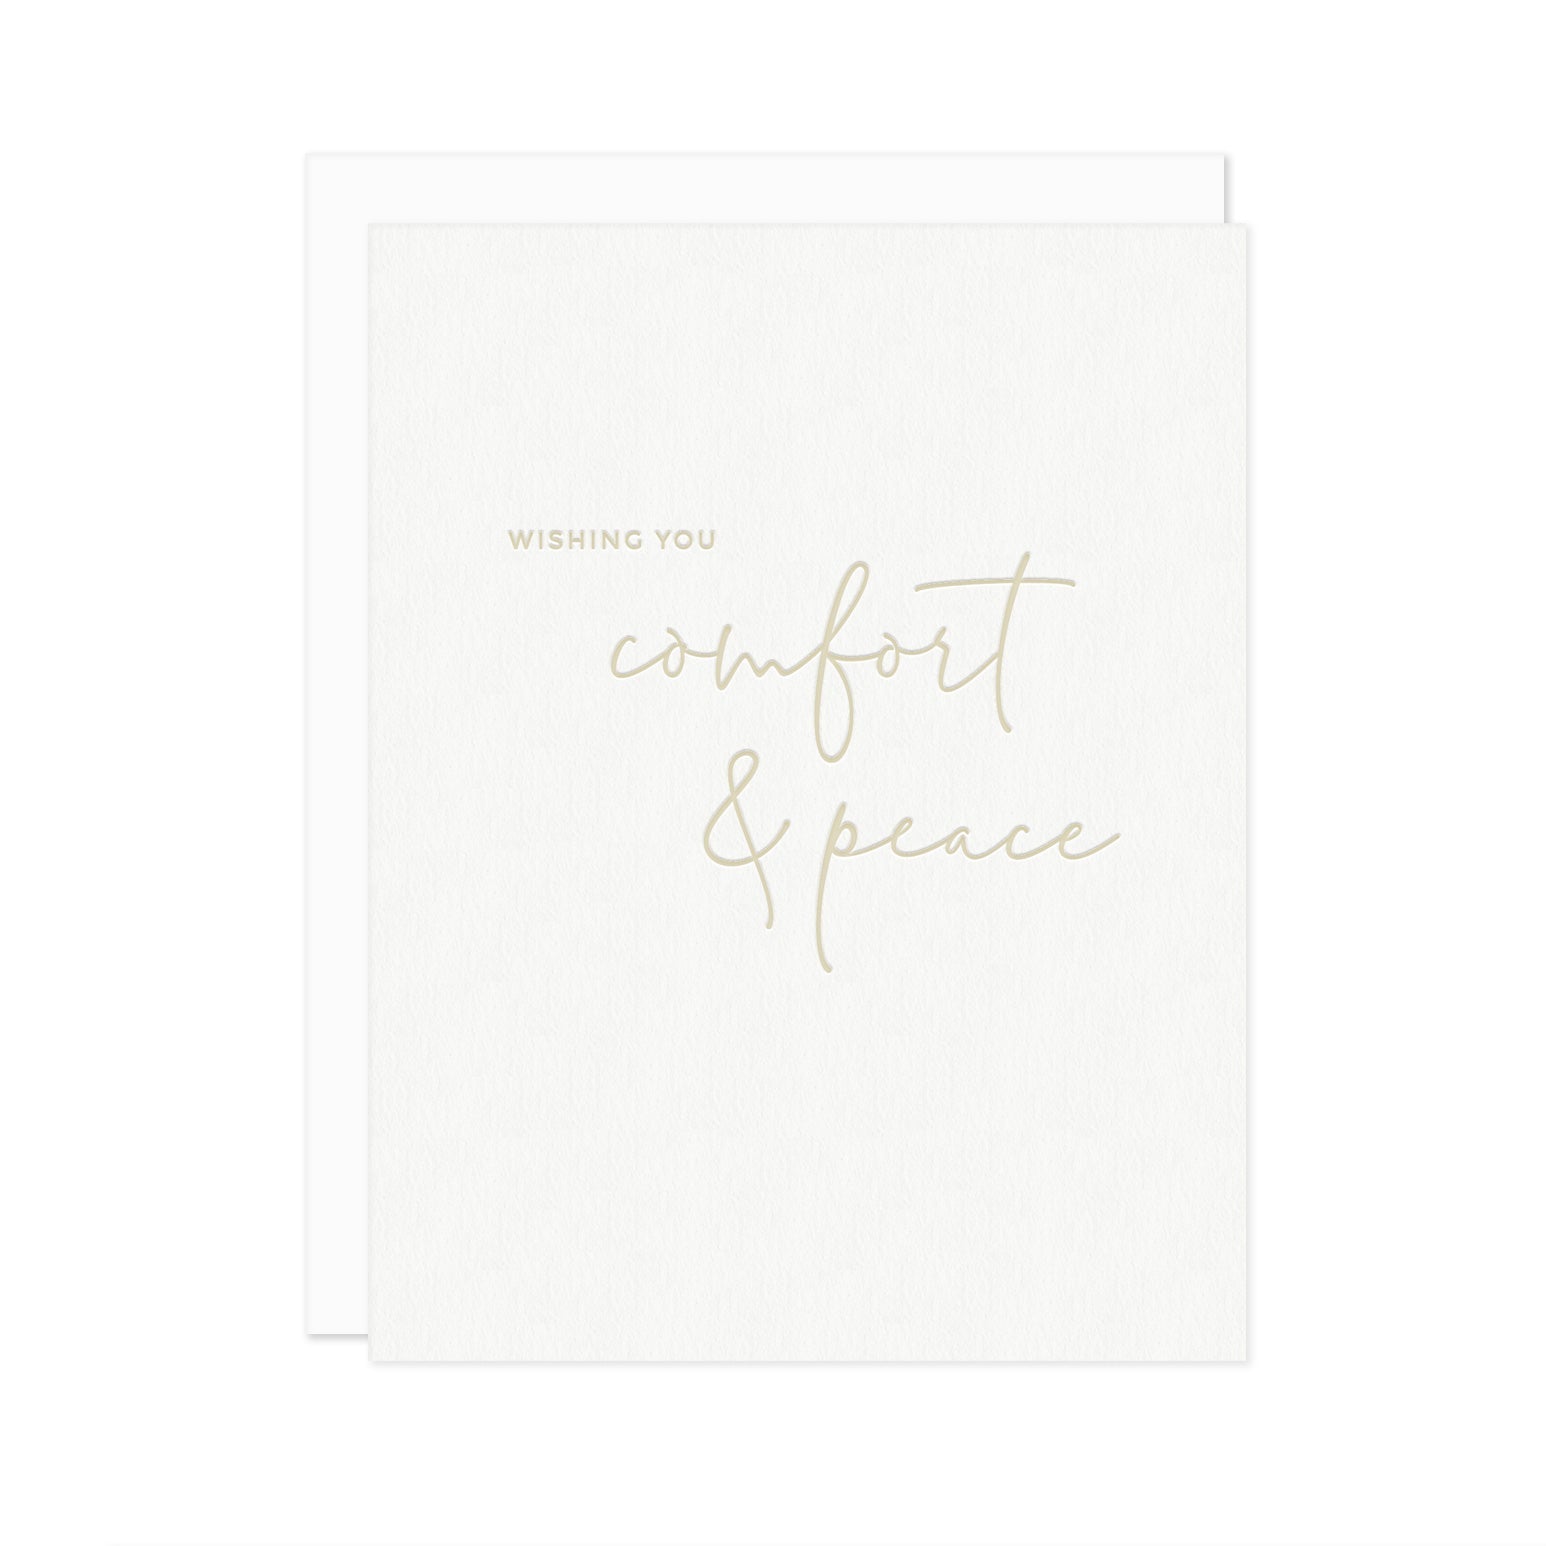 White 'Wishing You Comfort & Peace' card with white envelope